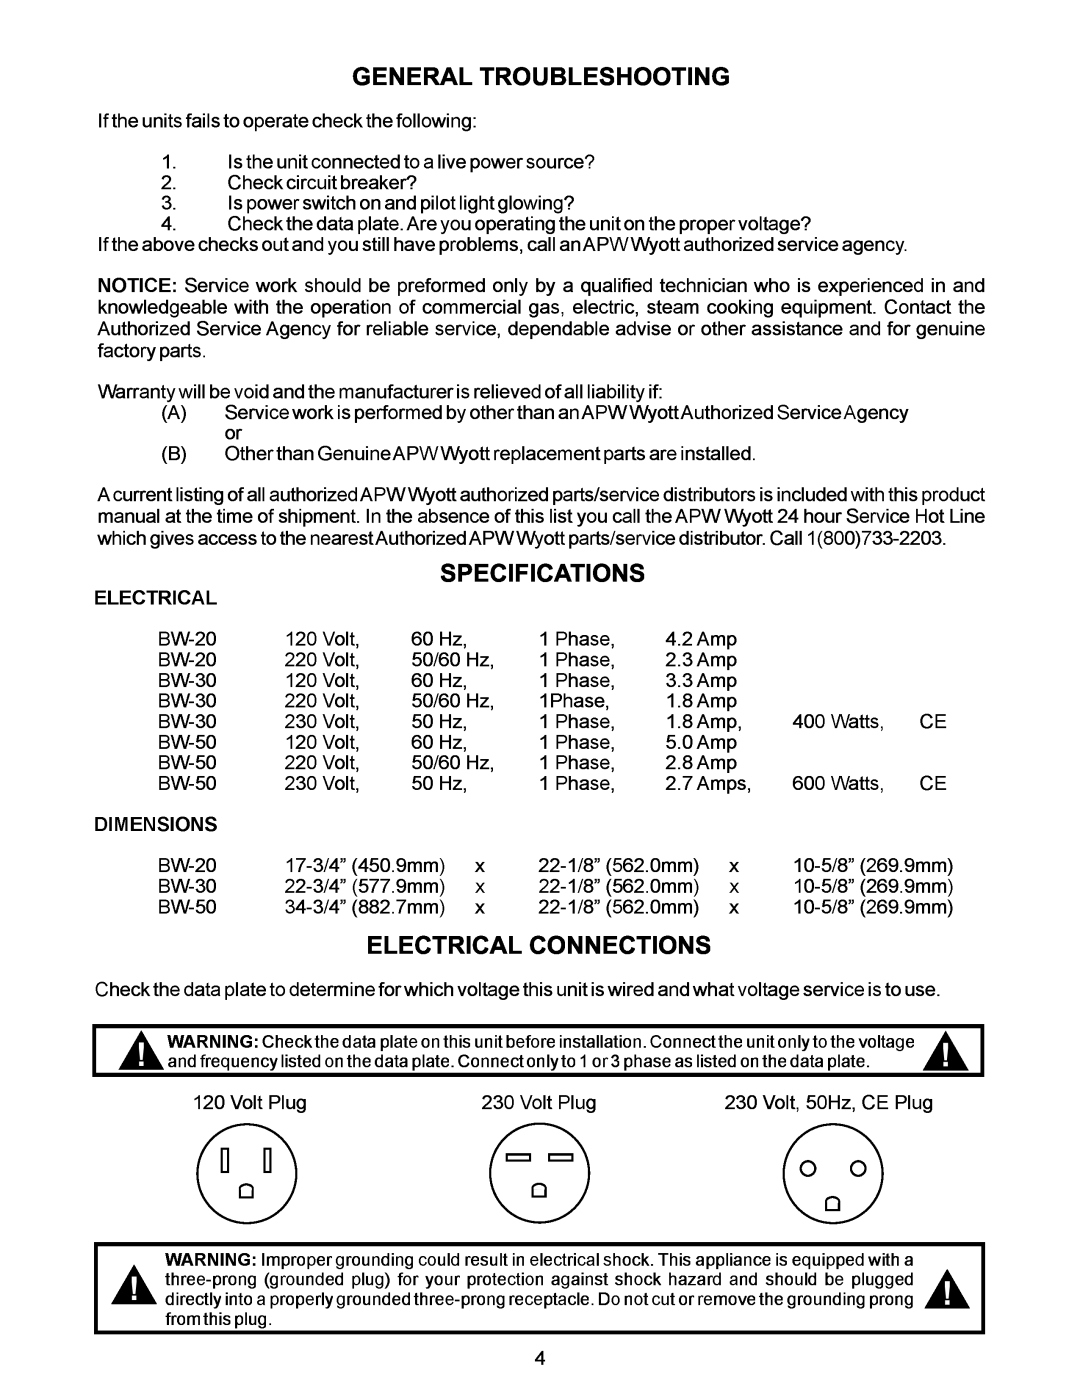 APW Wyott BW-30 operating instructions General Troubleshooting Specifications, Electrical Connections 